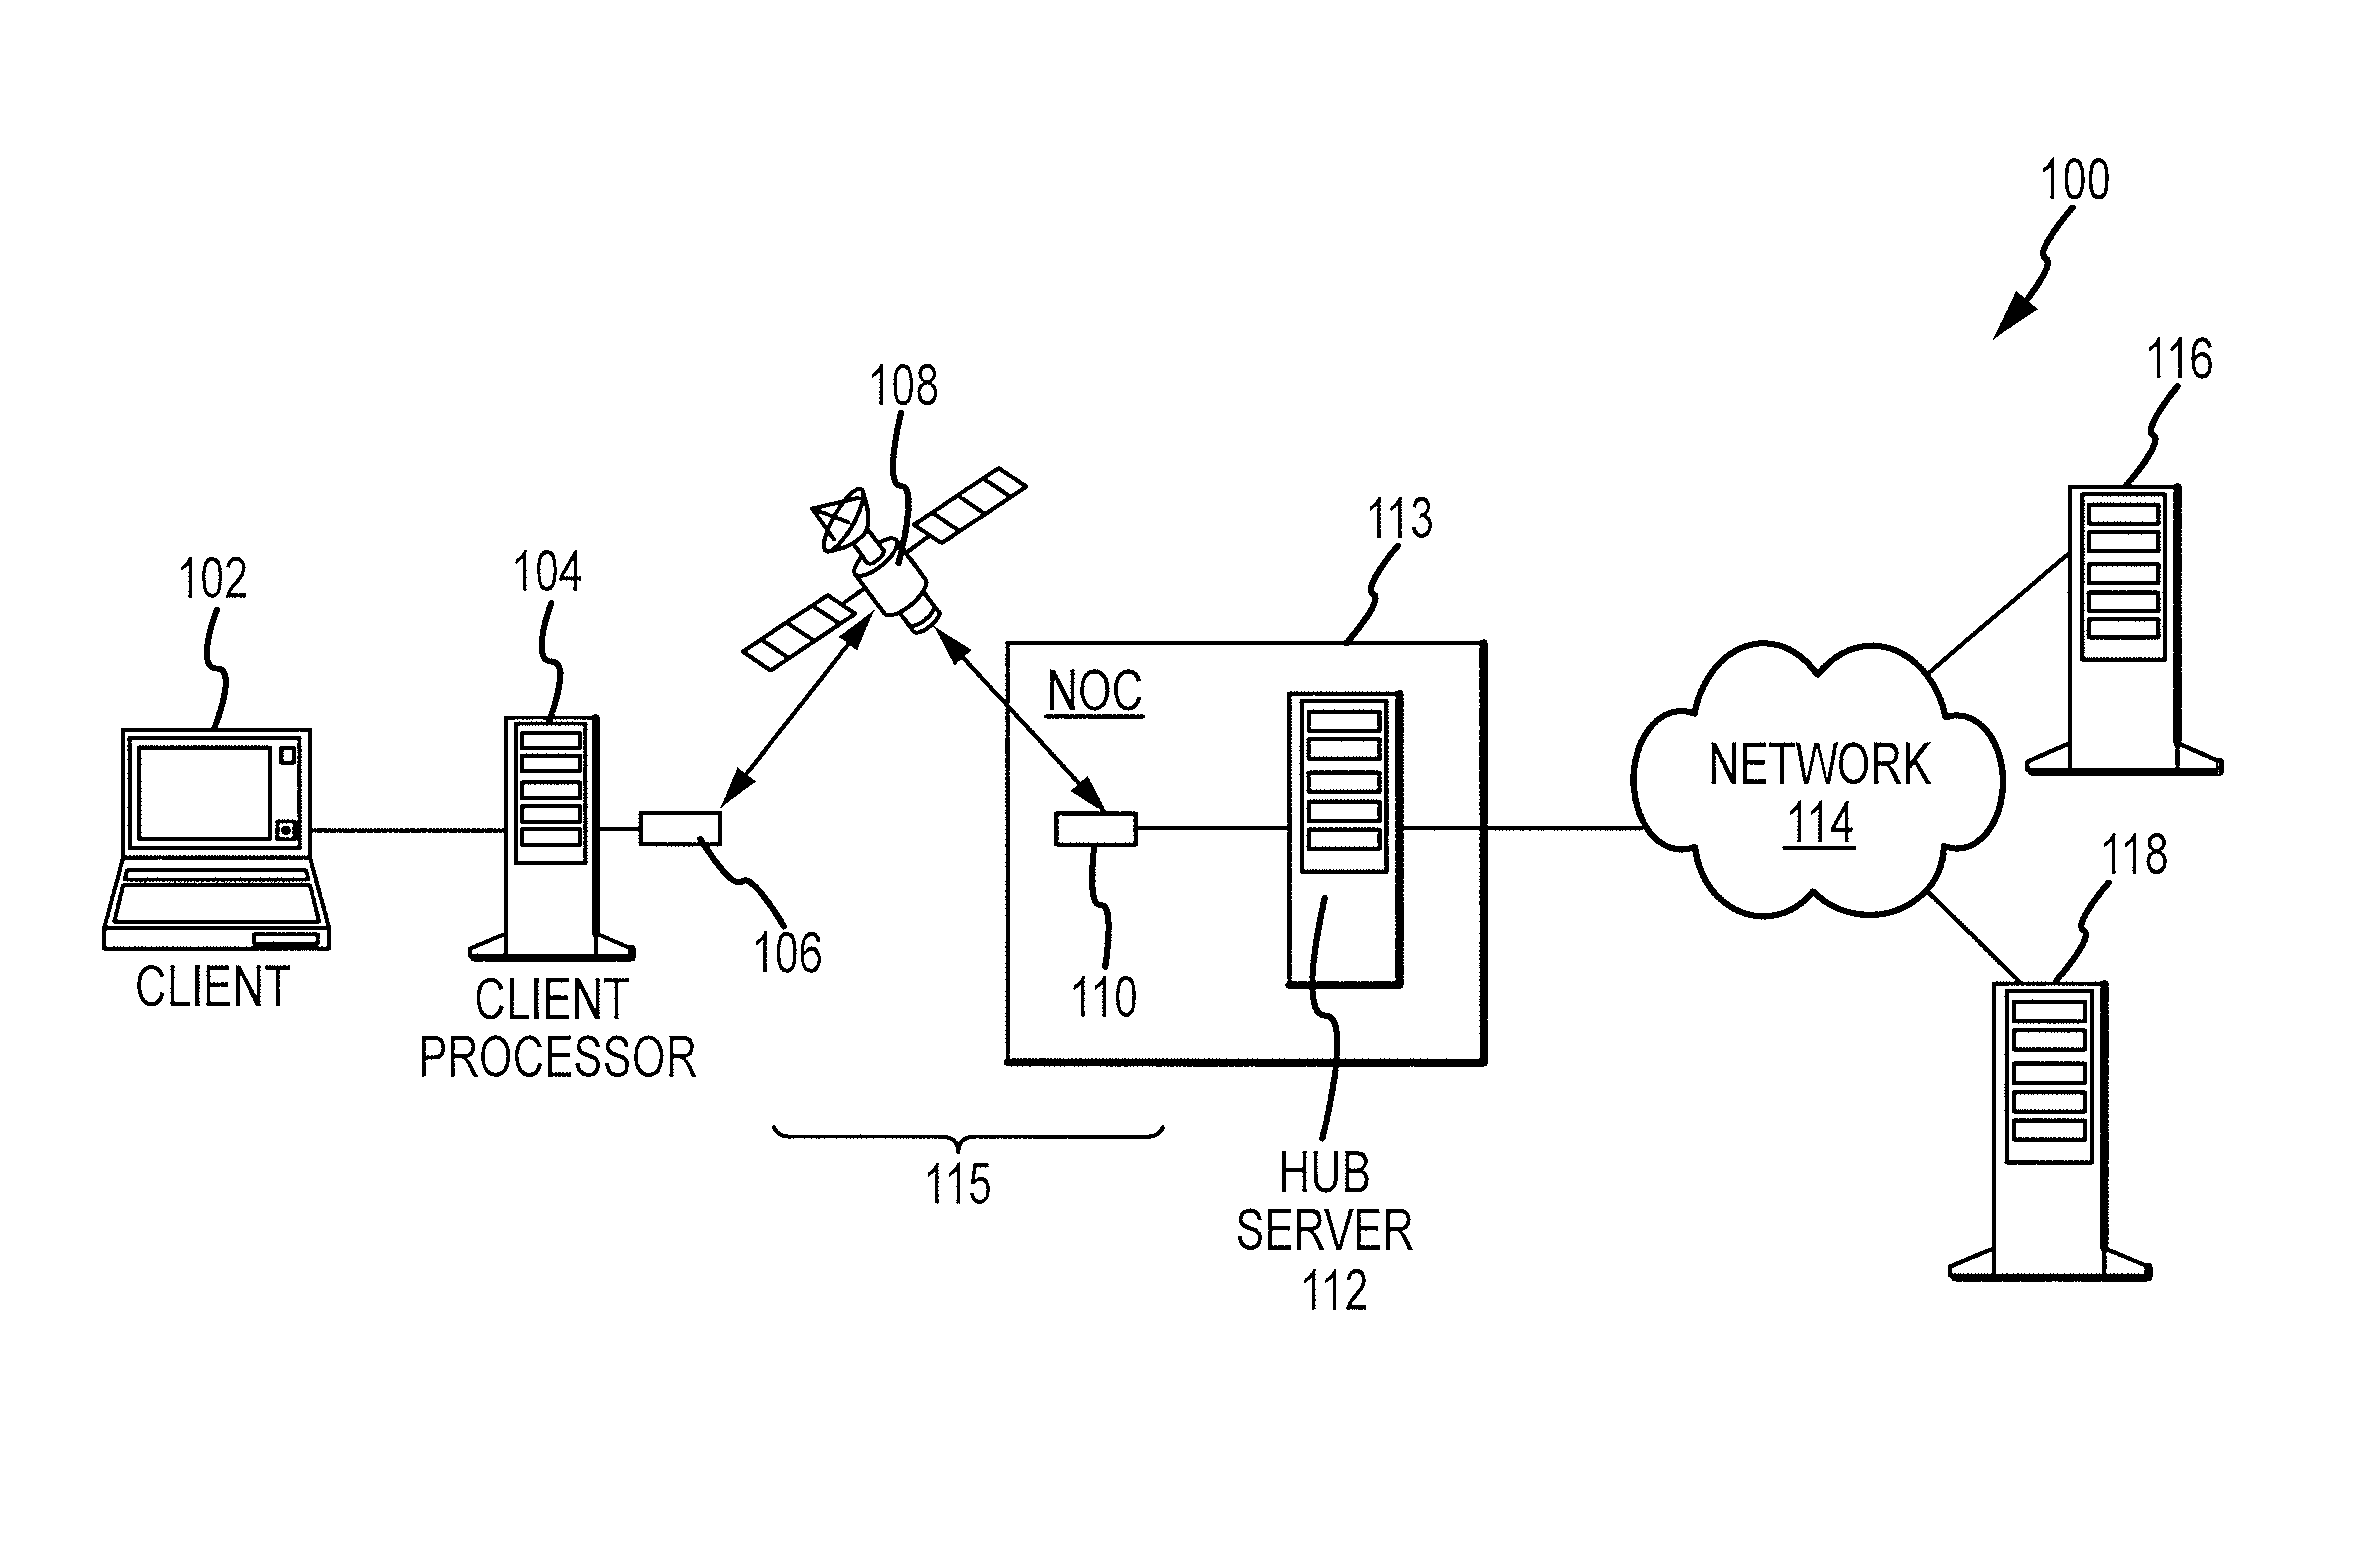 Systems & methods for statistical resolution of domain name service (DNS) requests